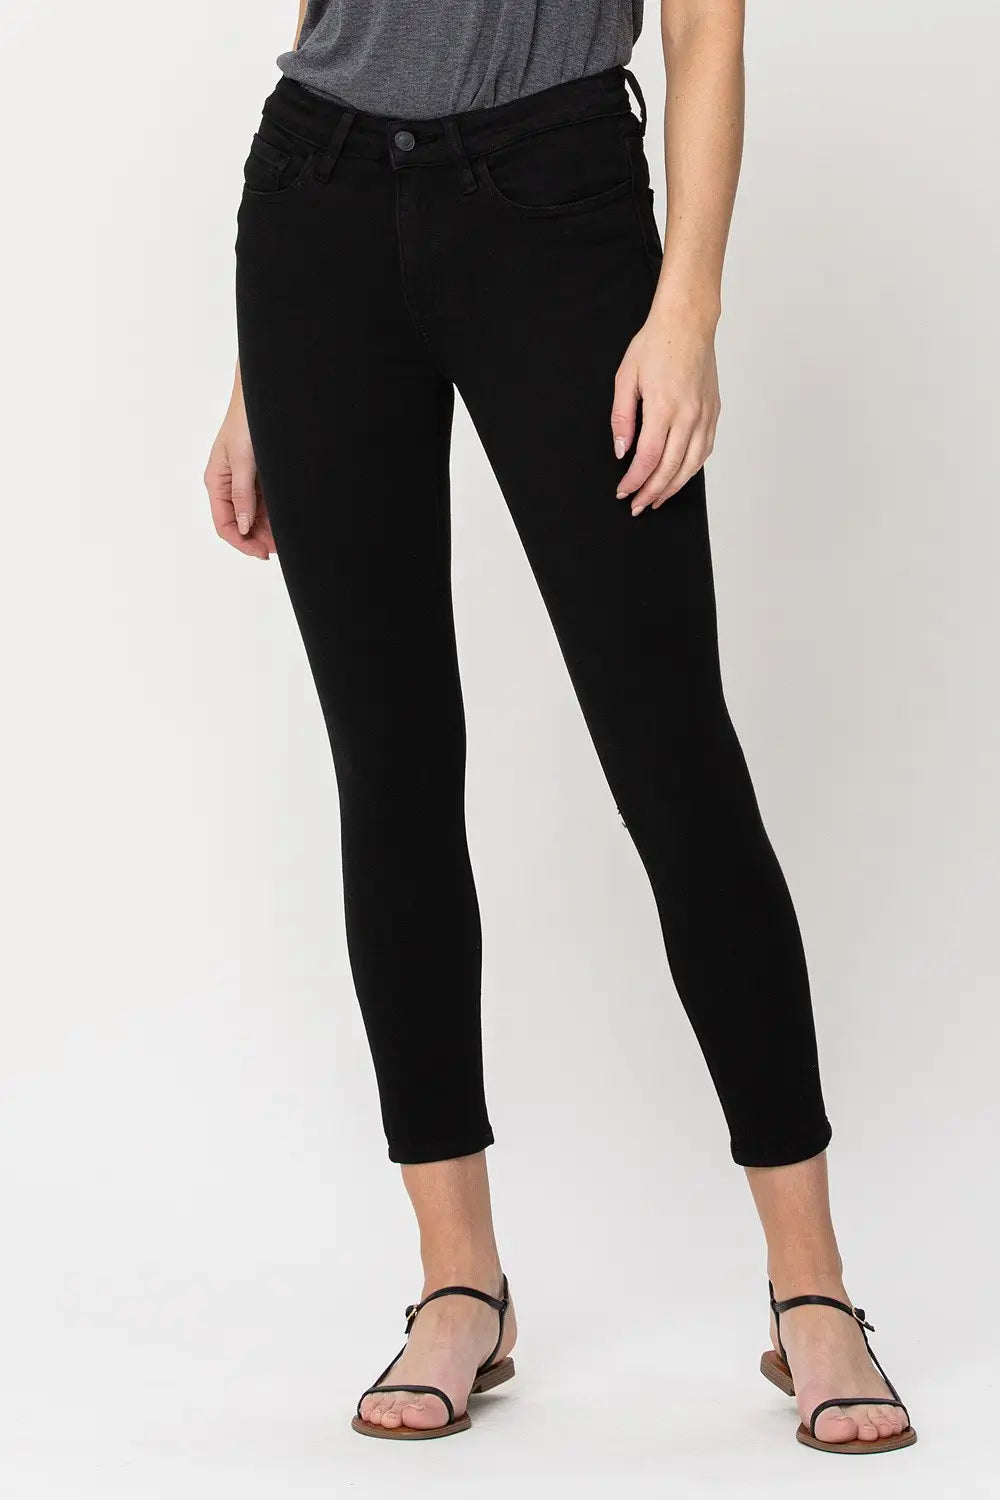 Flying Monkey Black Skinny Non-Distressed Jeans